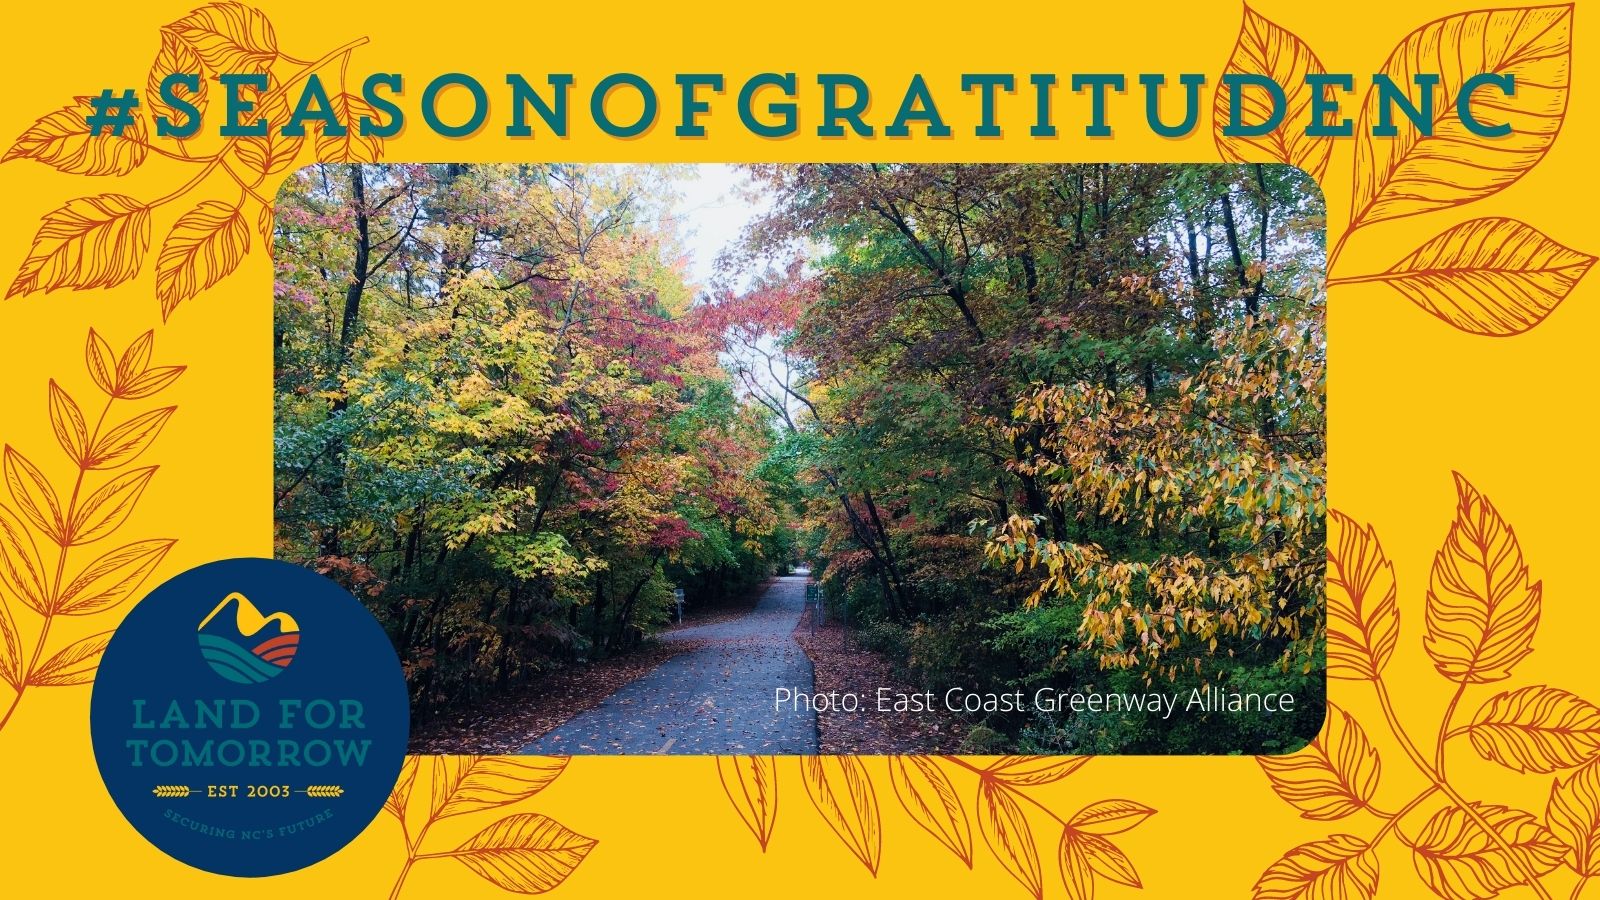 Giving thanks for land conservation trusts in this season of gratitude